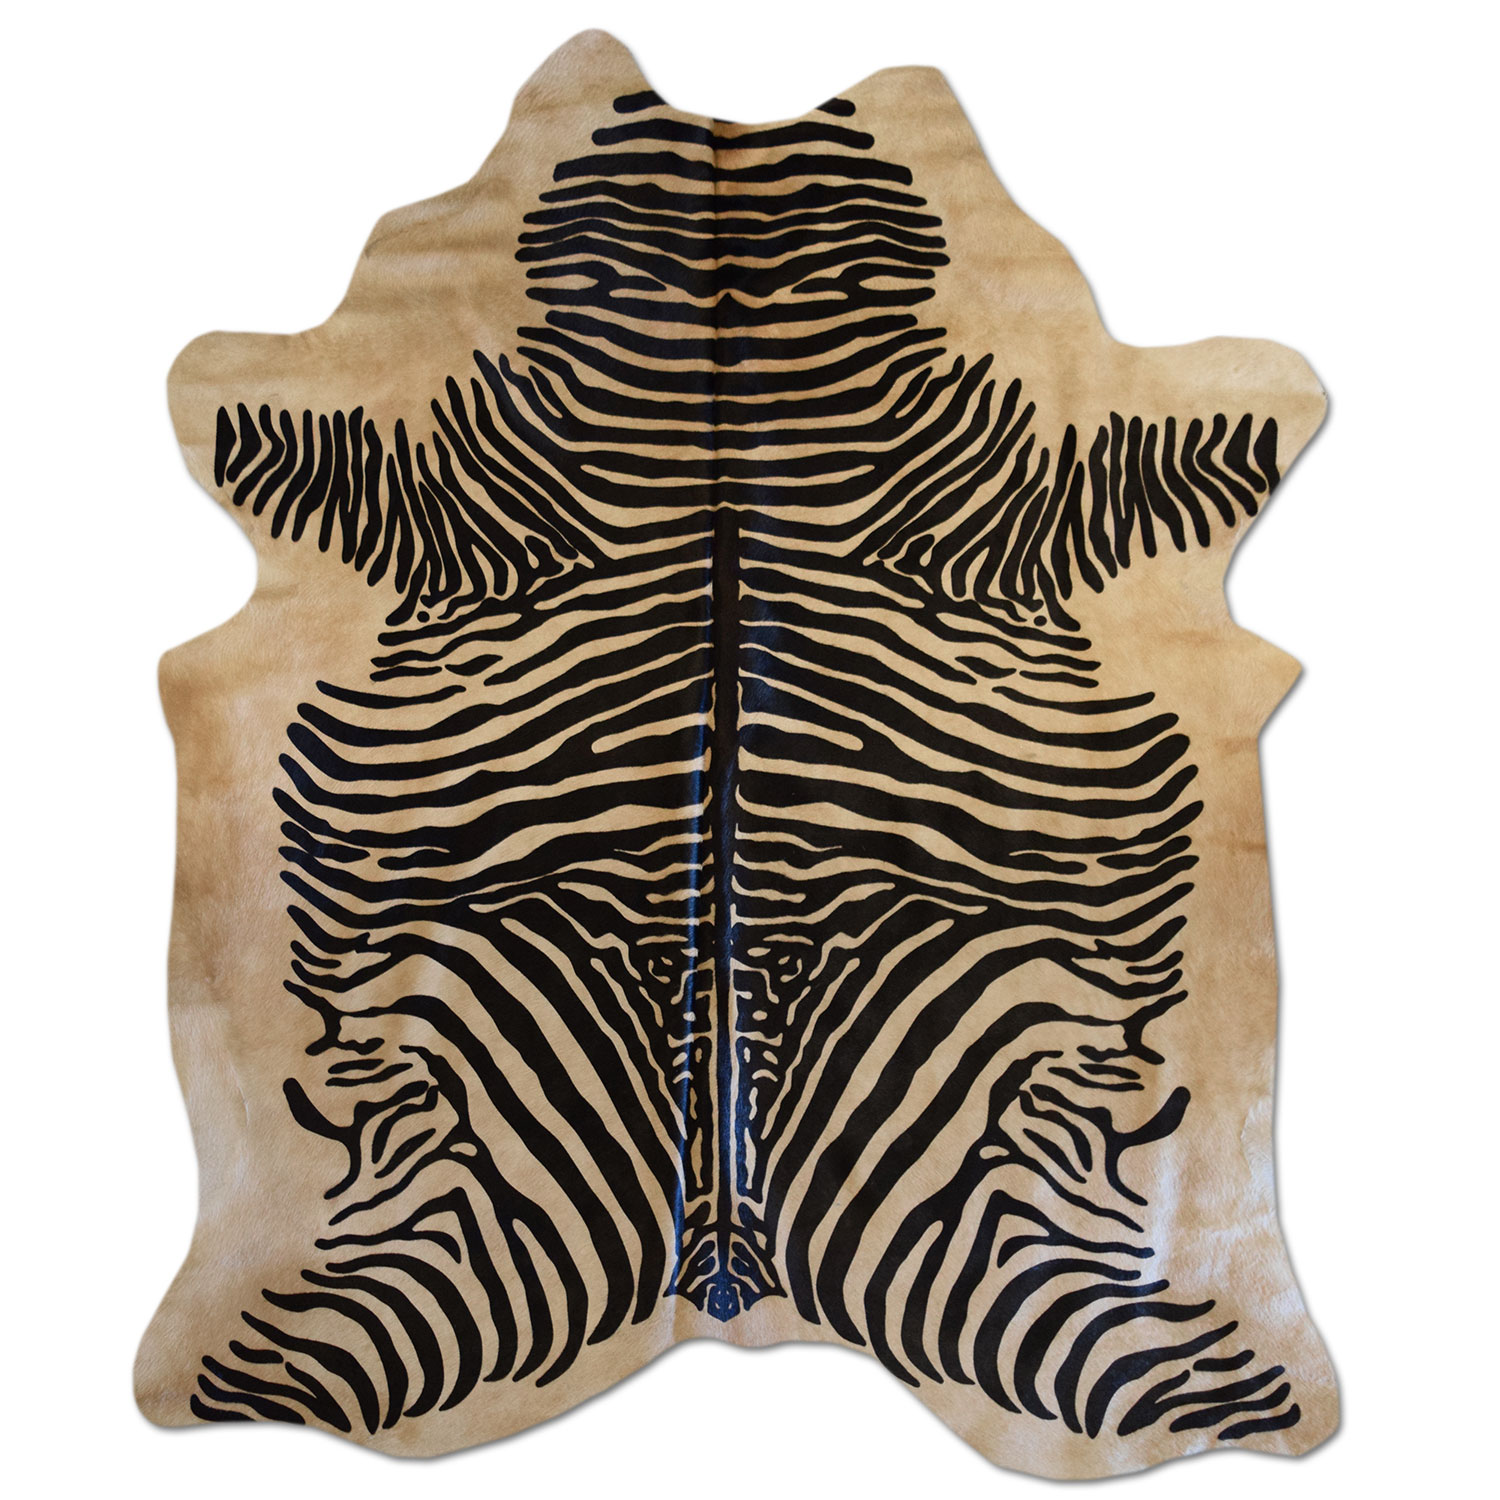 322301XL-1465 - One of a Kind 78in L x 71in W Stenciled Zebra Black on Tan Superior Grade-A Cowhide